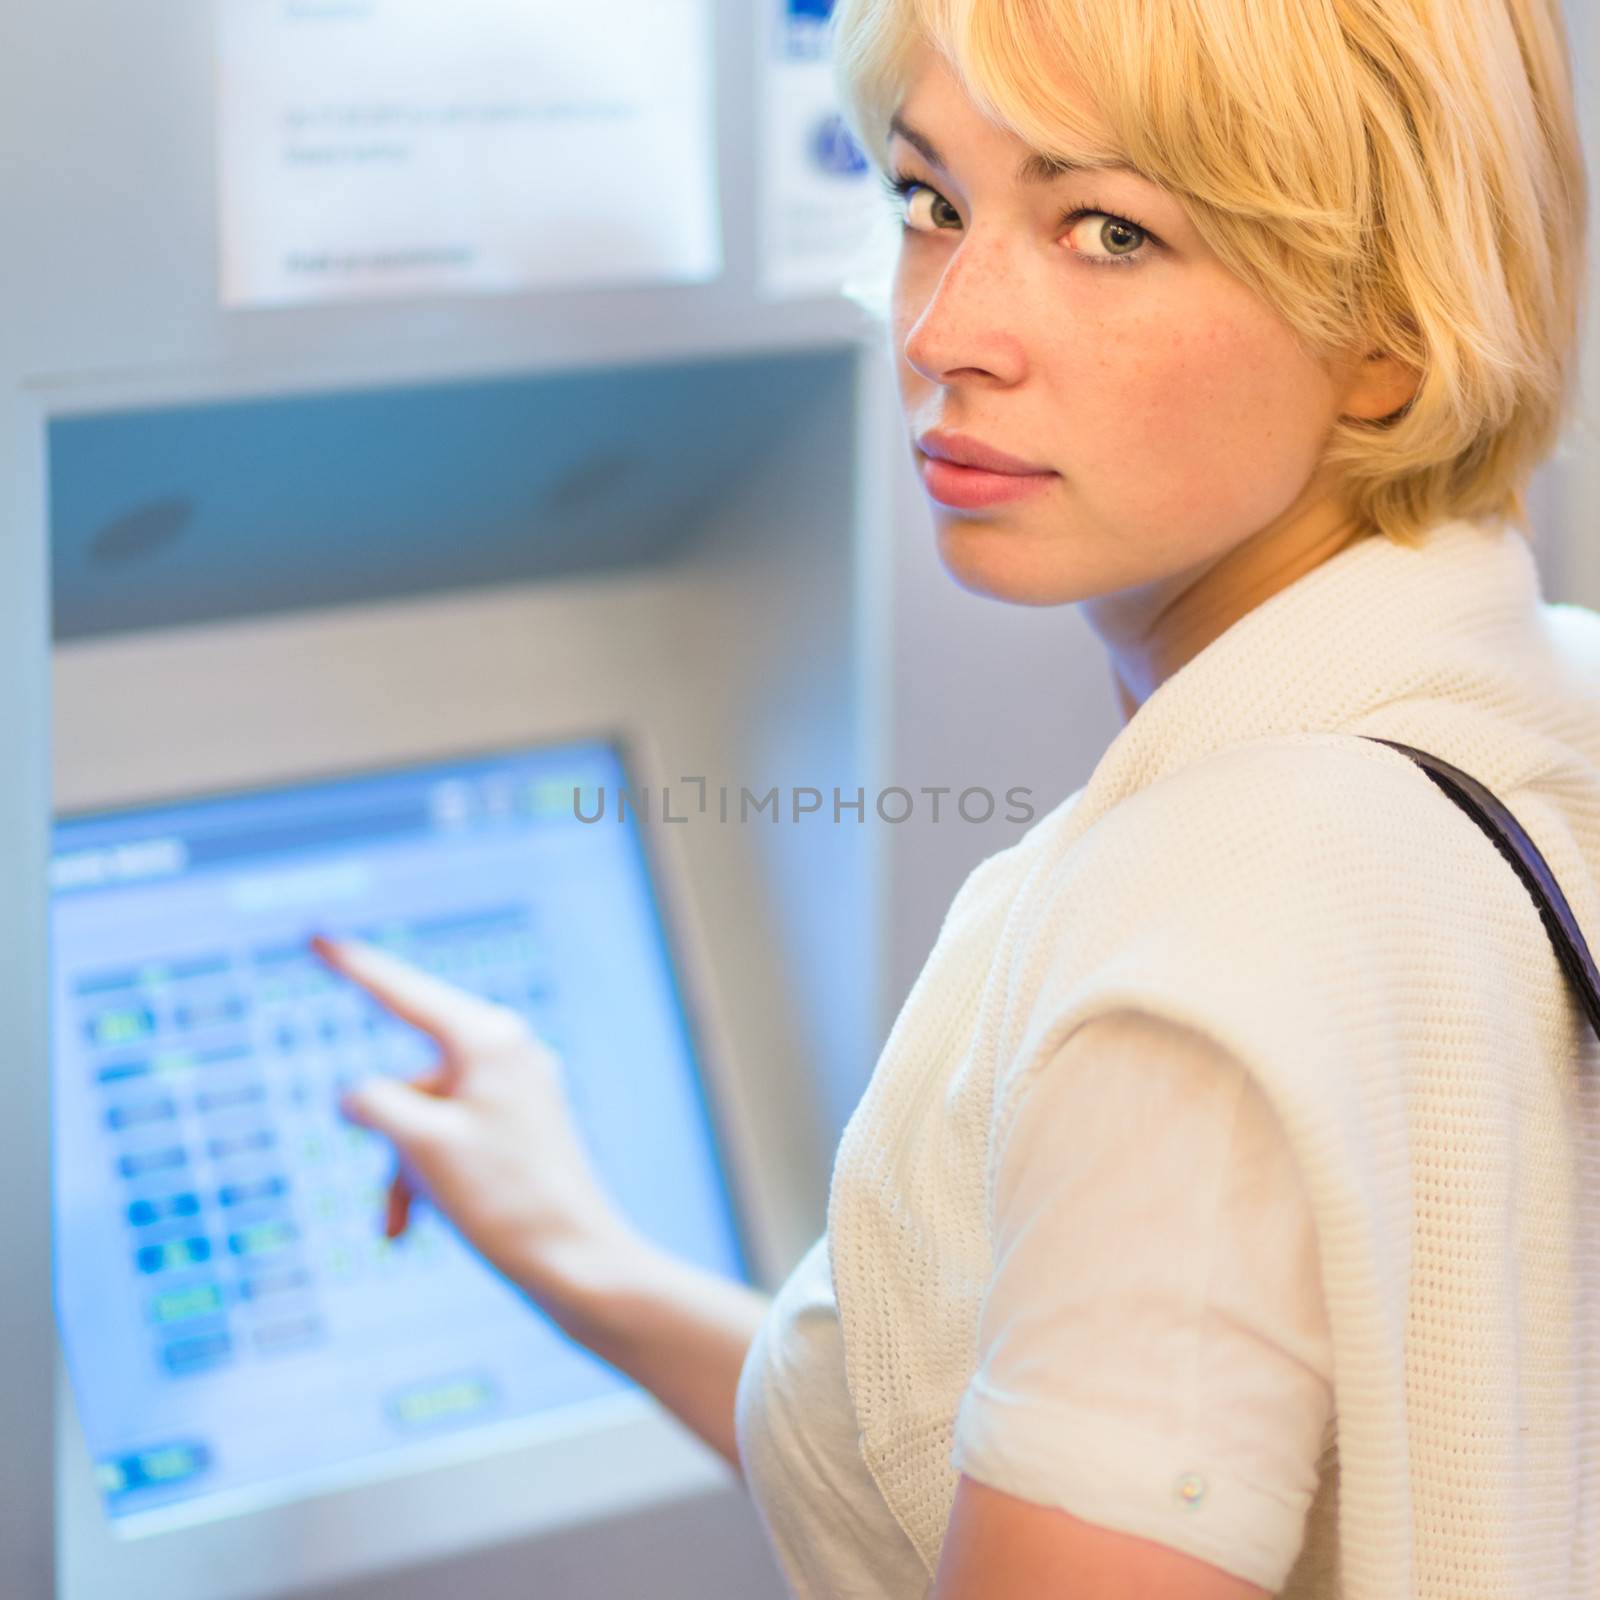 Lady using ticket vending machine. by kasto